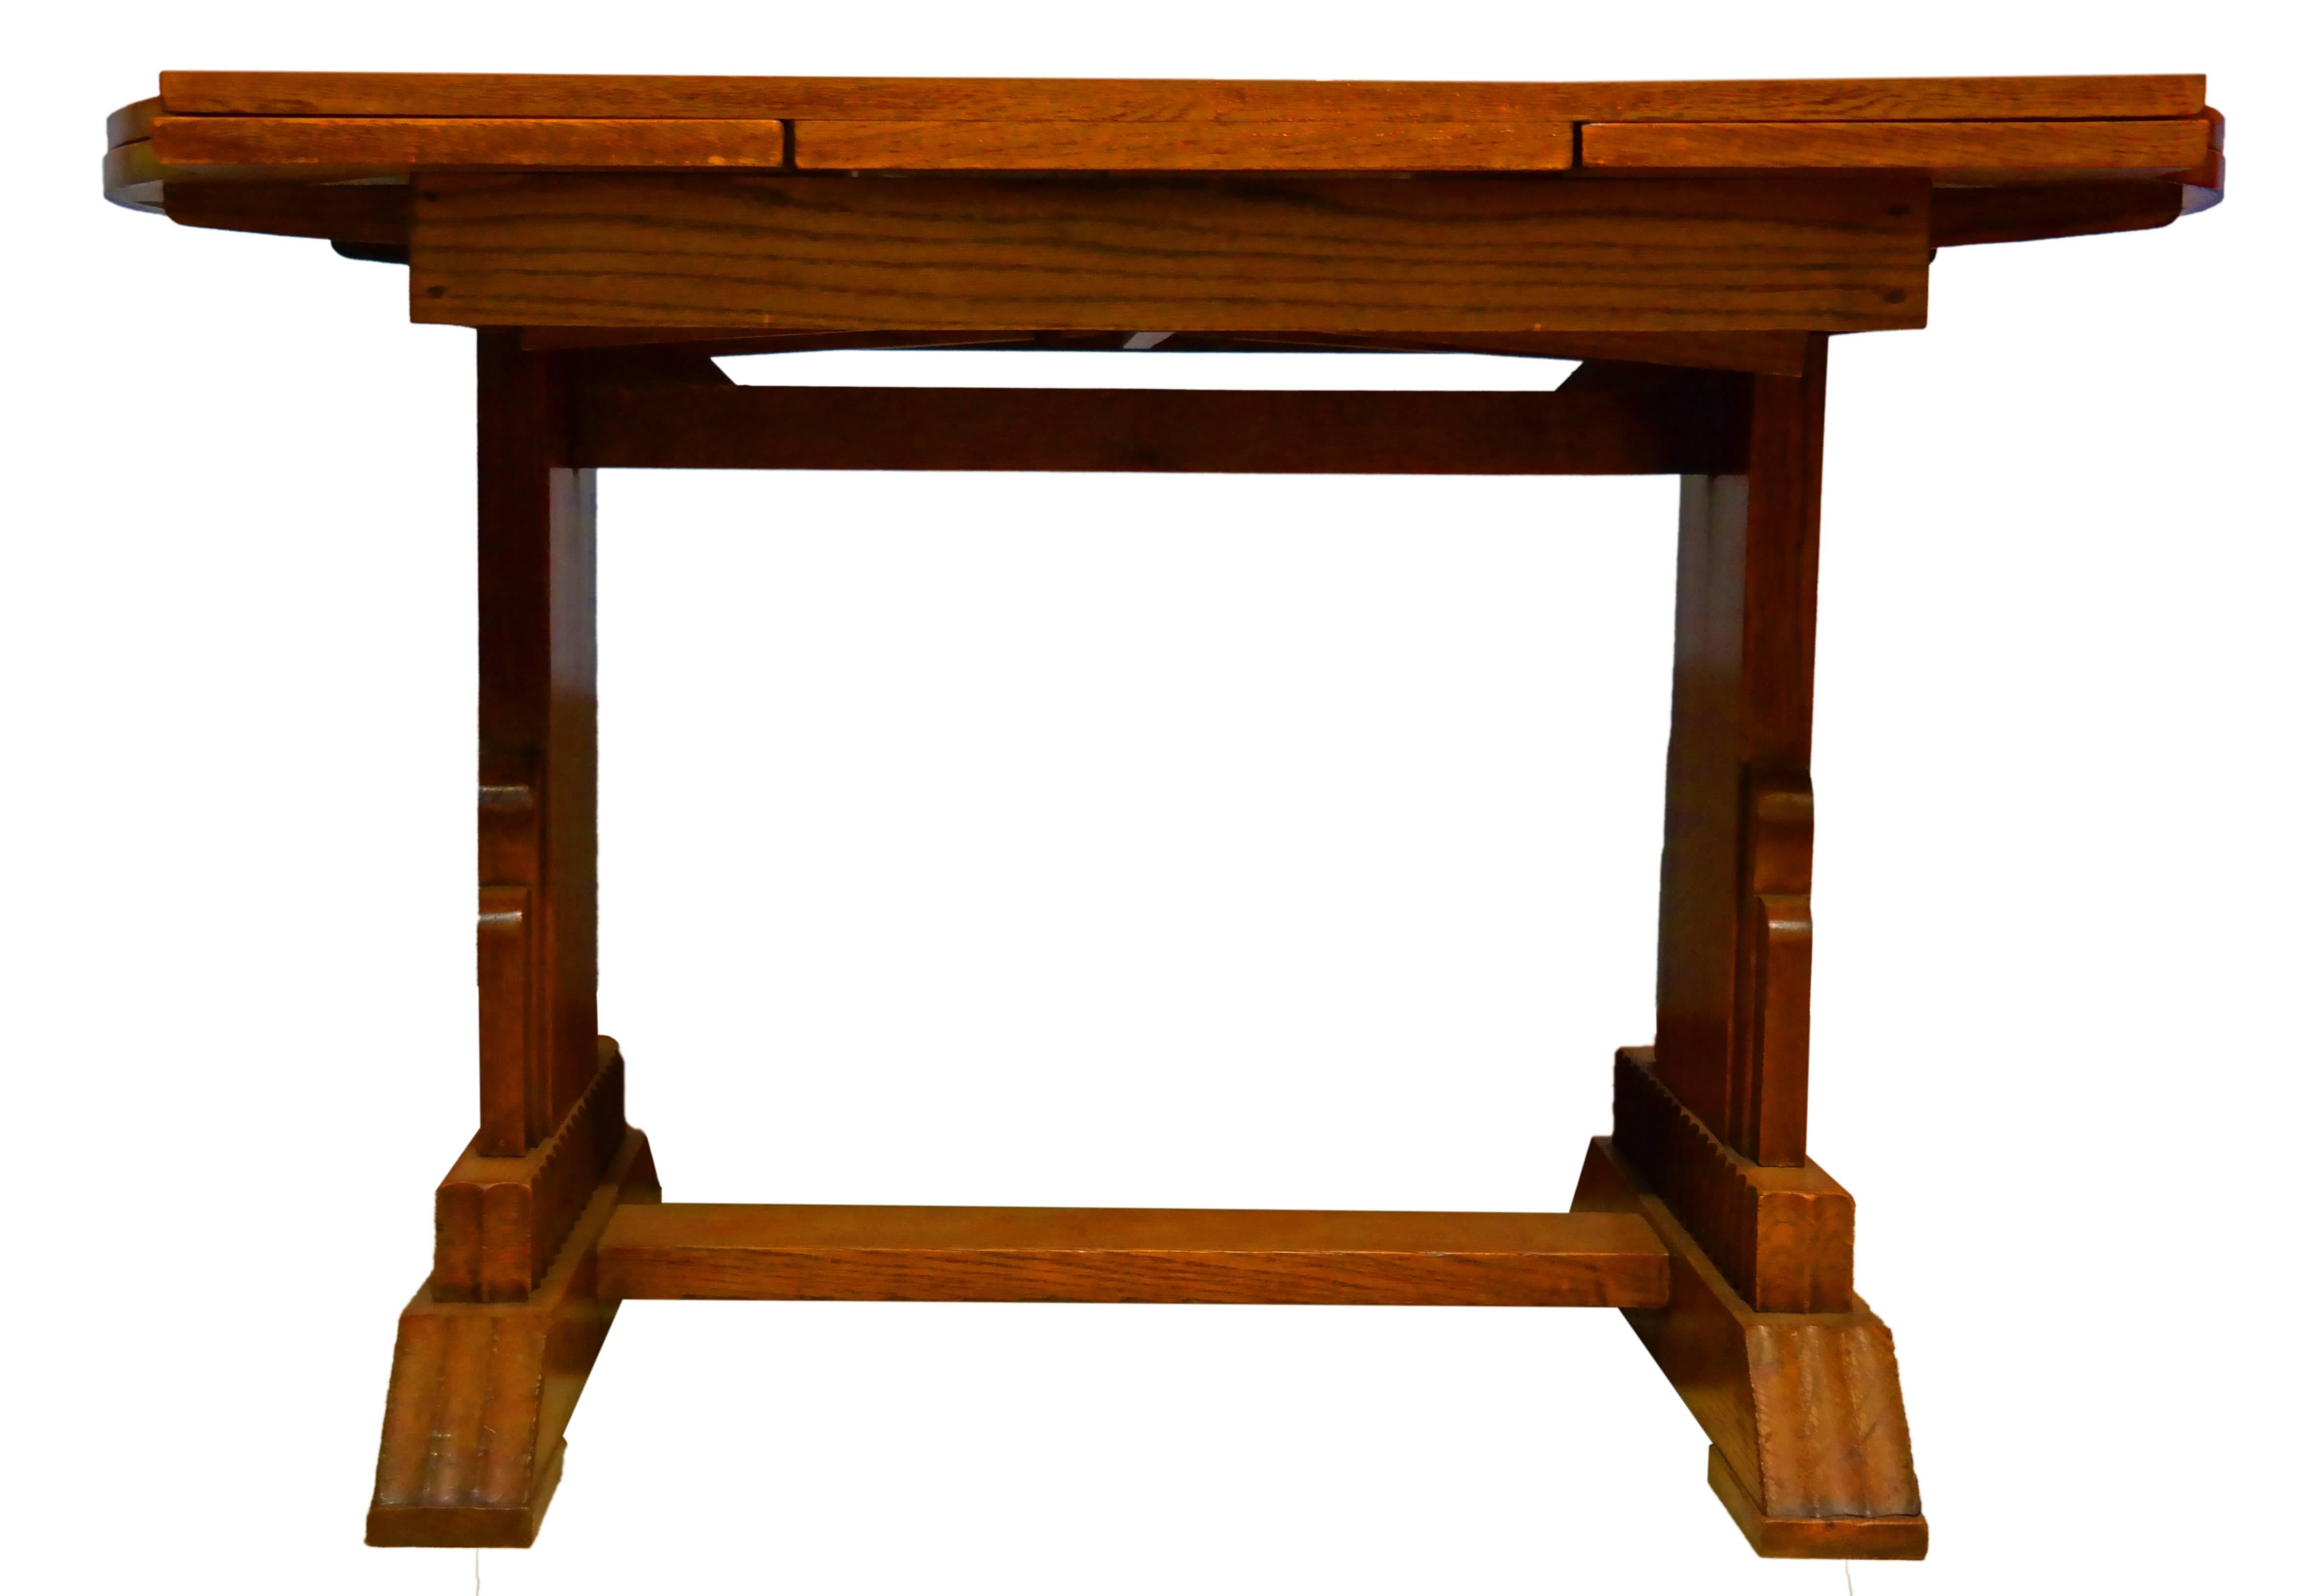 1930s Art Deco golden oak draw-leaf extendable dining table with a trestle base.

Regular Dimension = 36.5